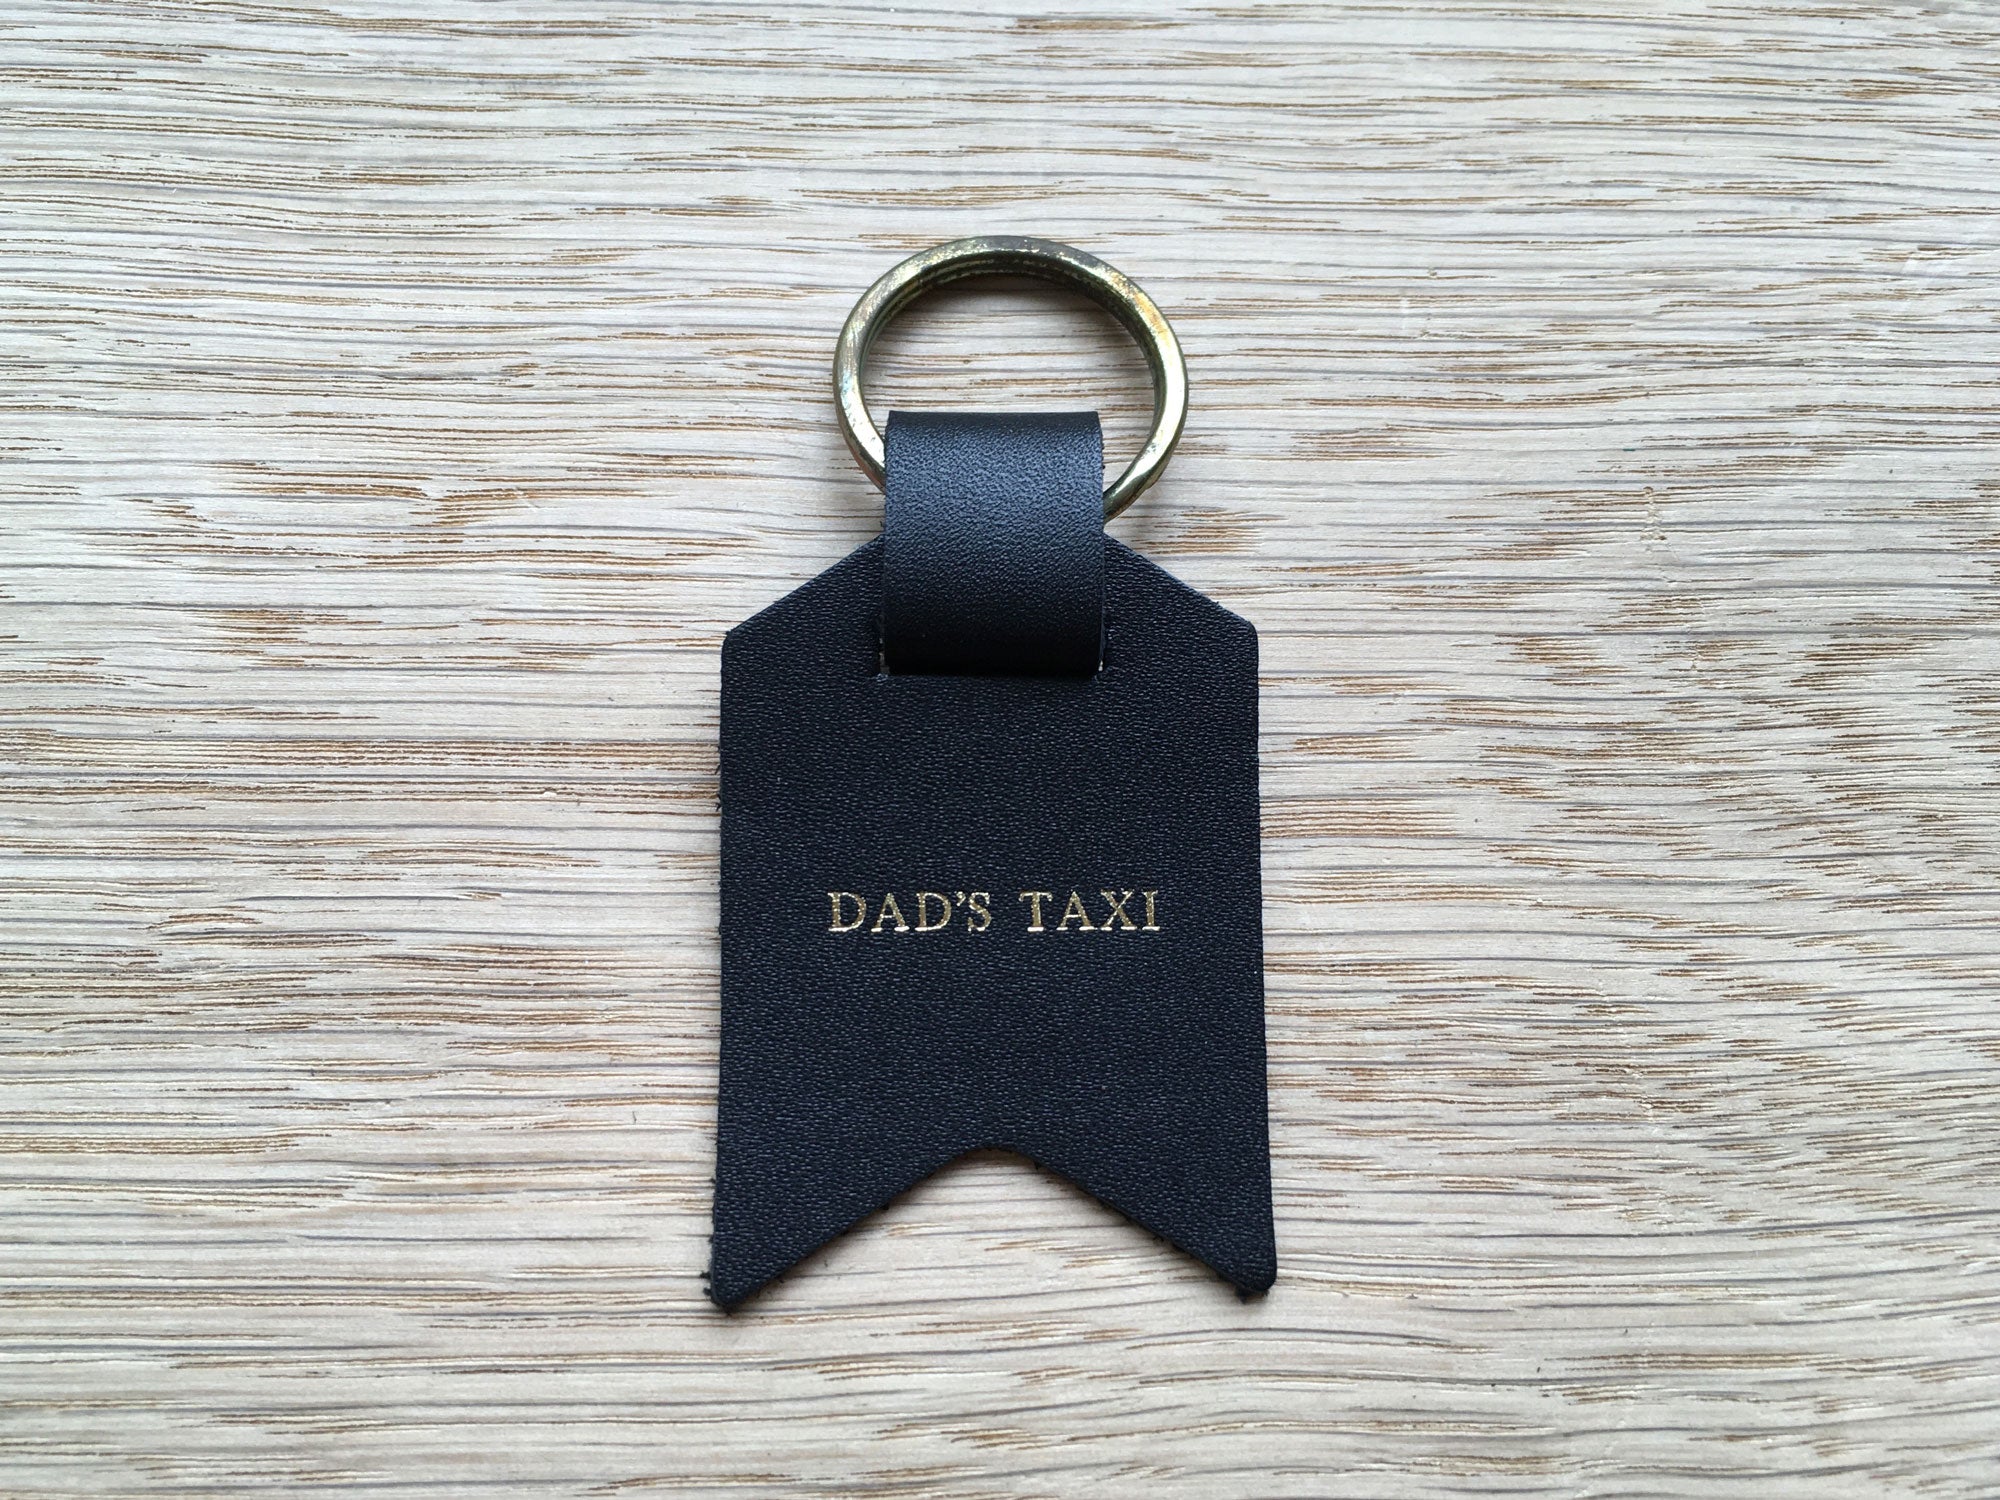 Also available – Dad's Taxi, Black Leather Keyring